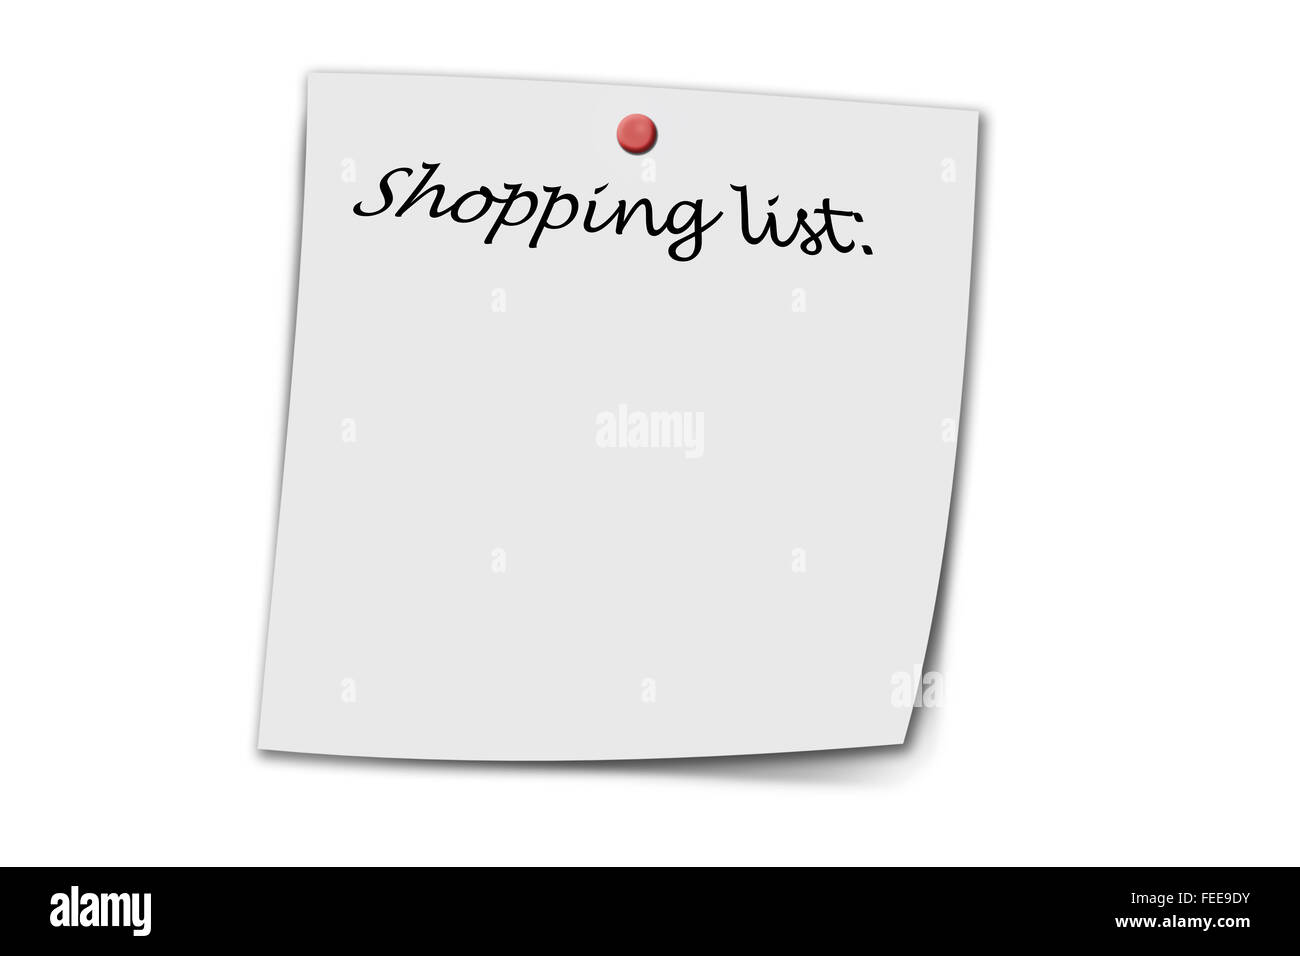 shopping list written on a memo isolated on white Stock Photo